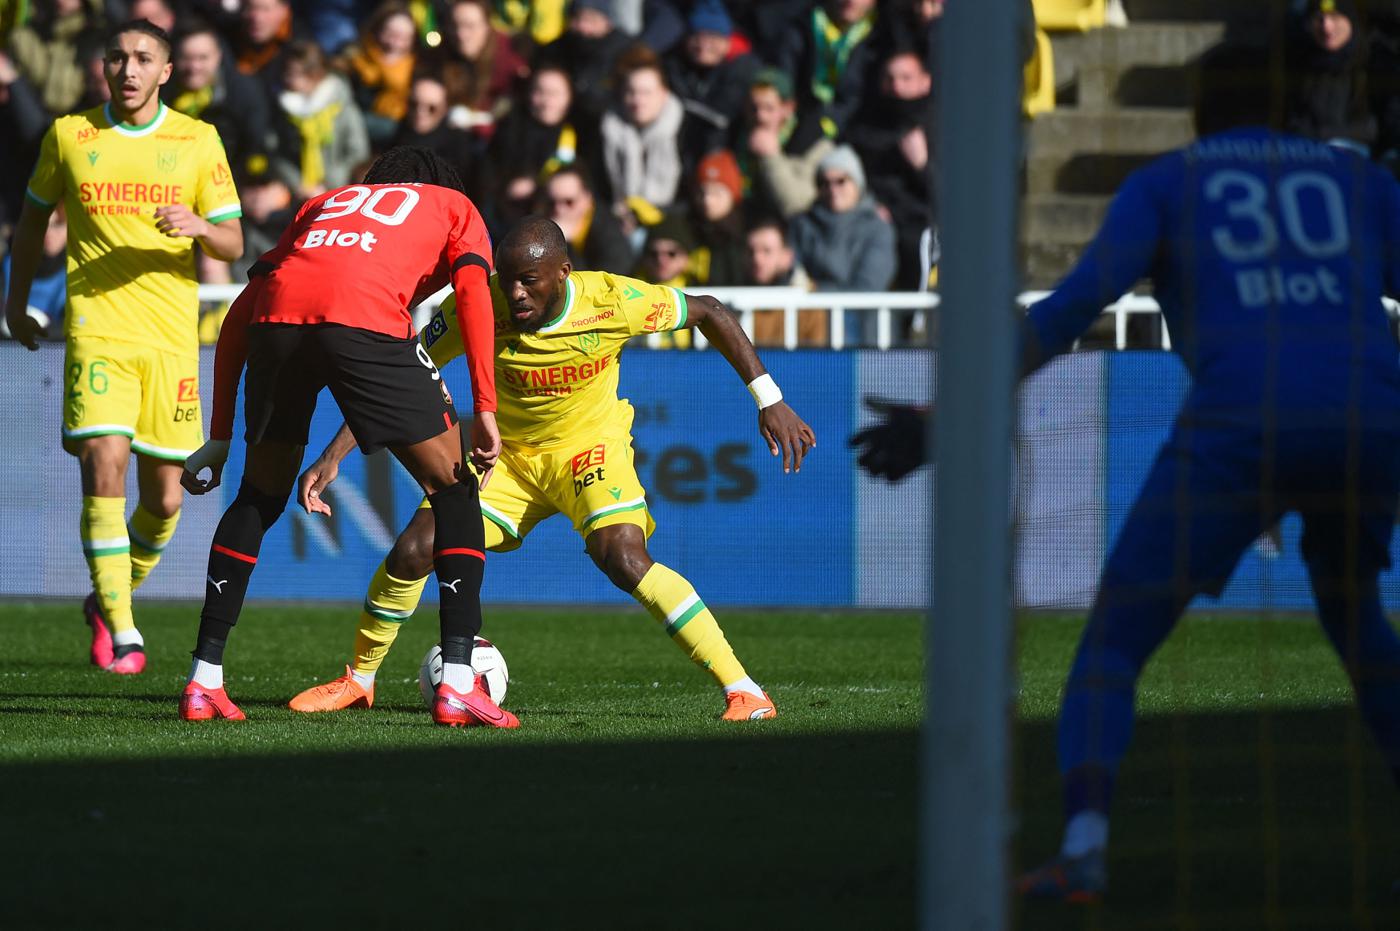 Nantes - Rennes - 0-1. French Championship, 25th round. Match Review, Statistics